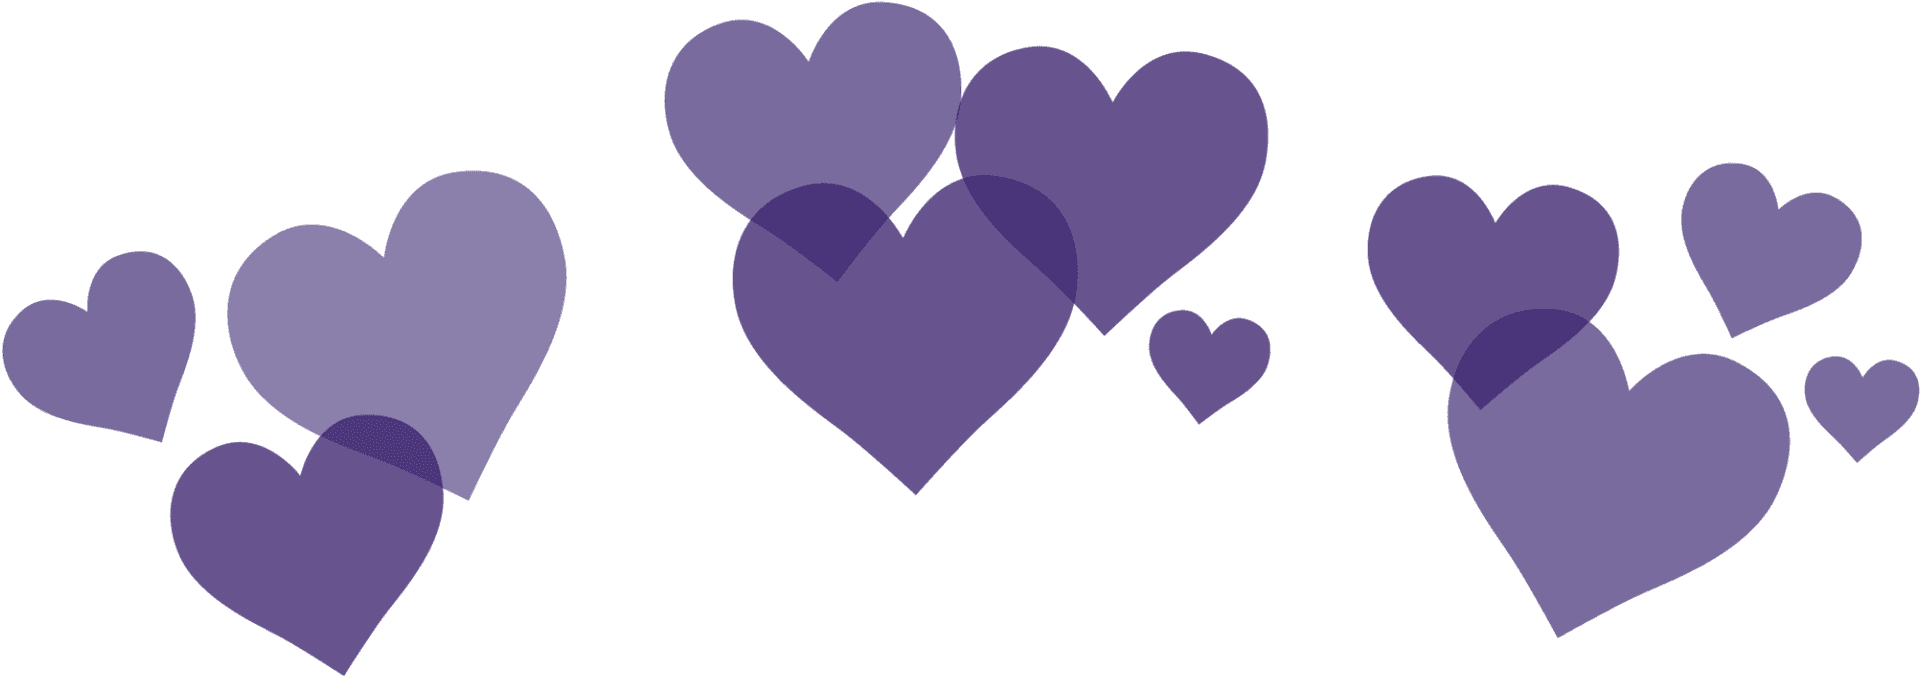 Floating Hearts Overlay Graphic PNG